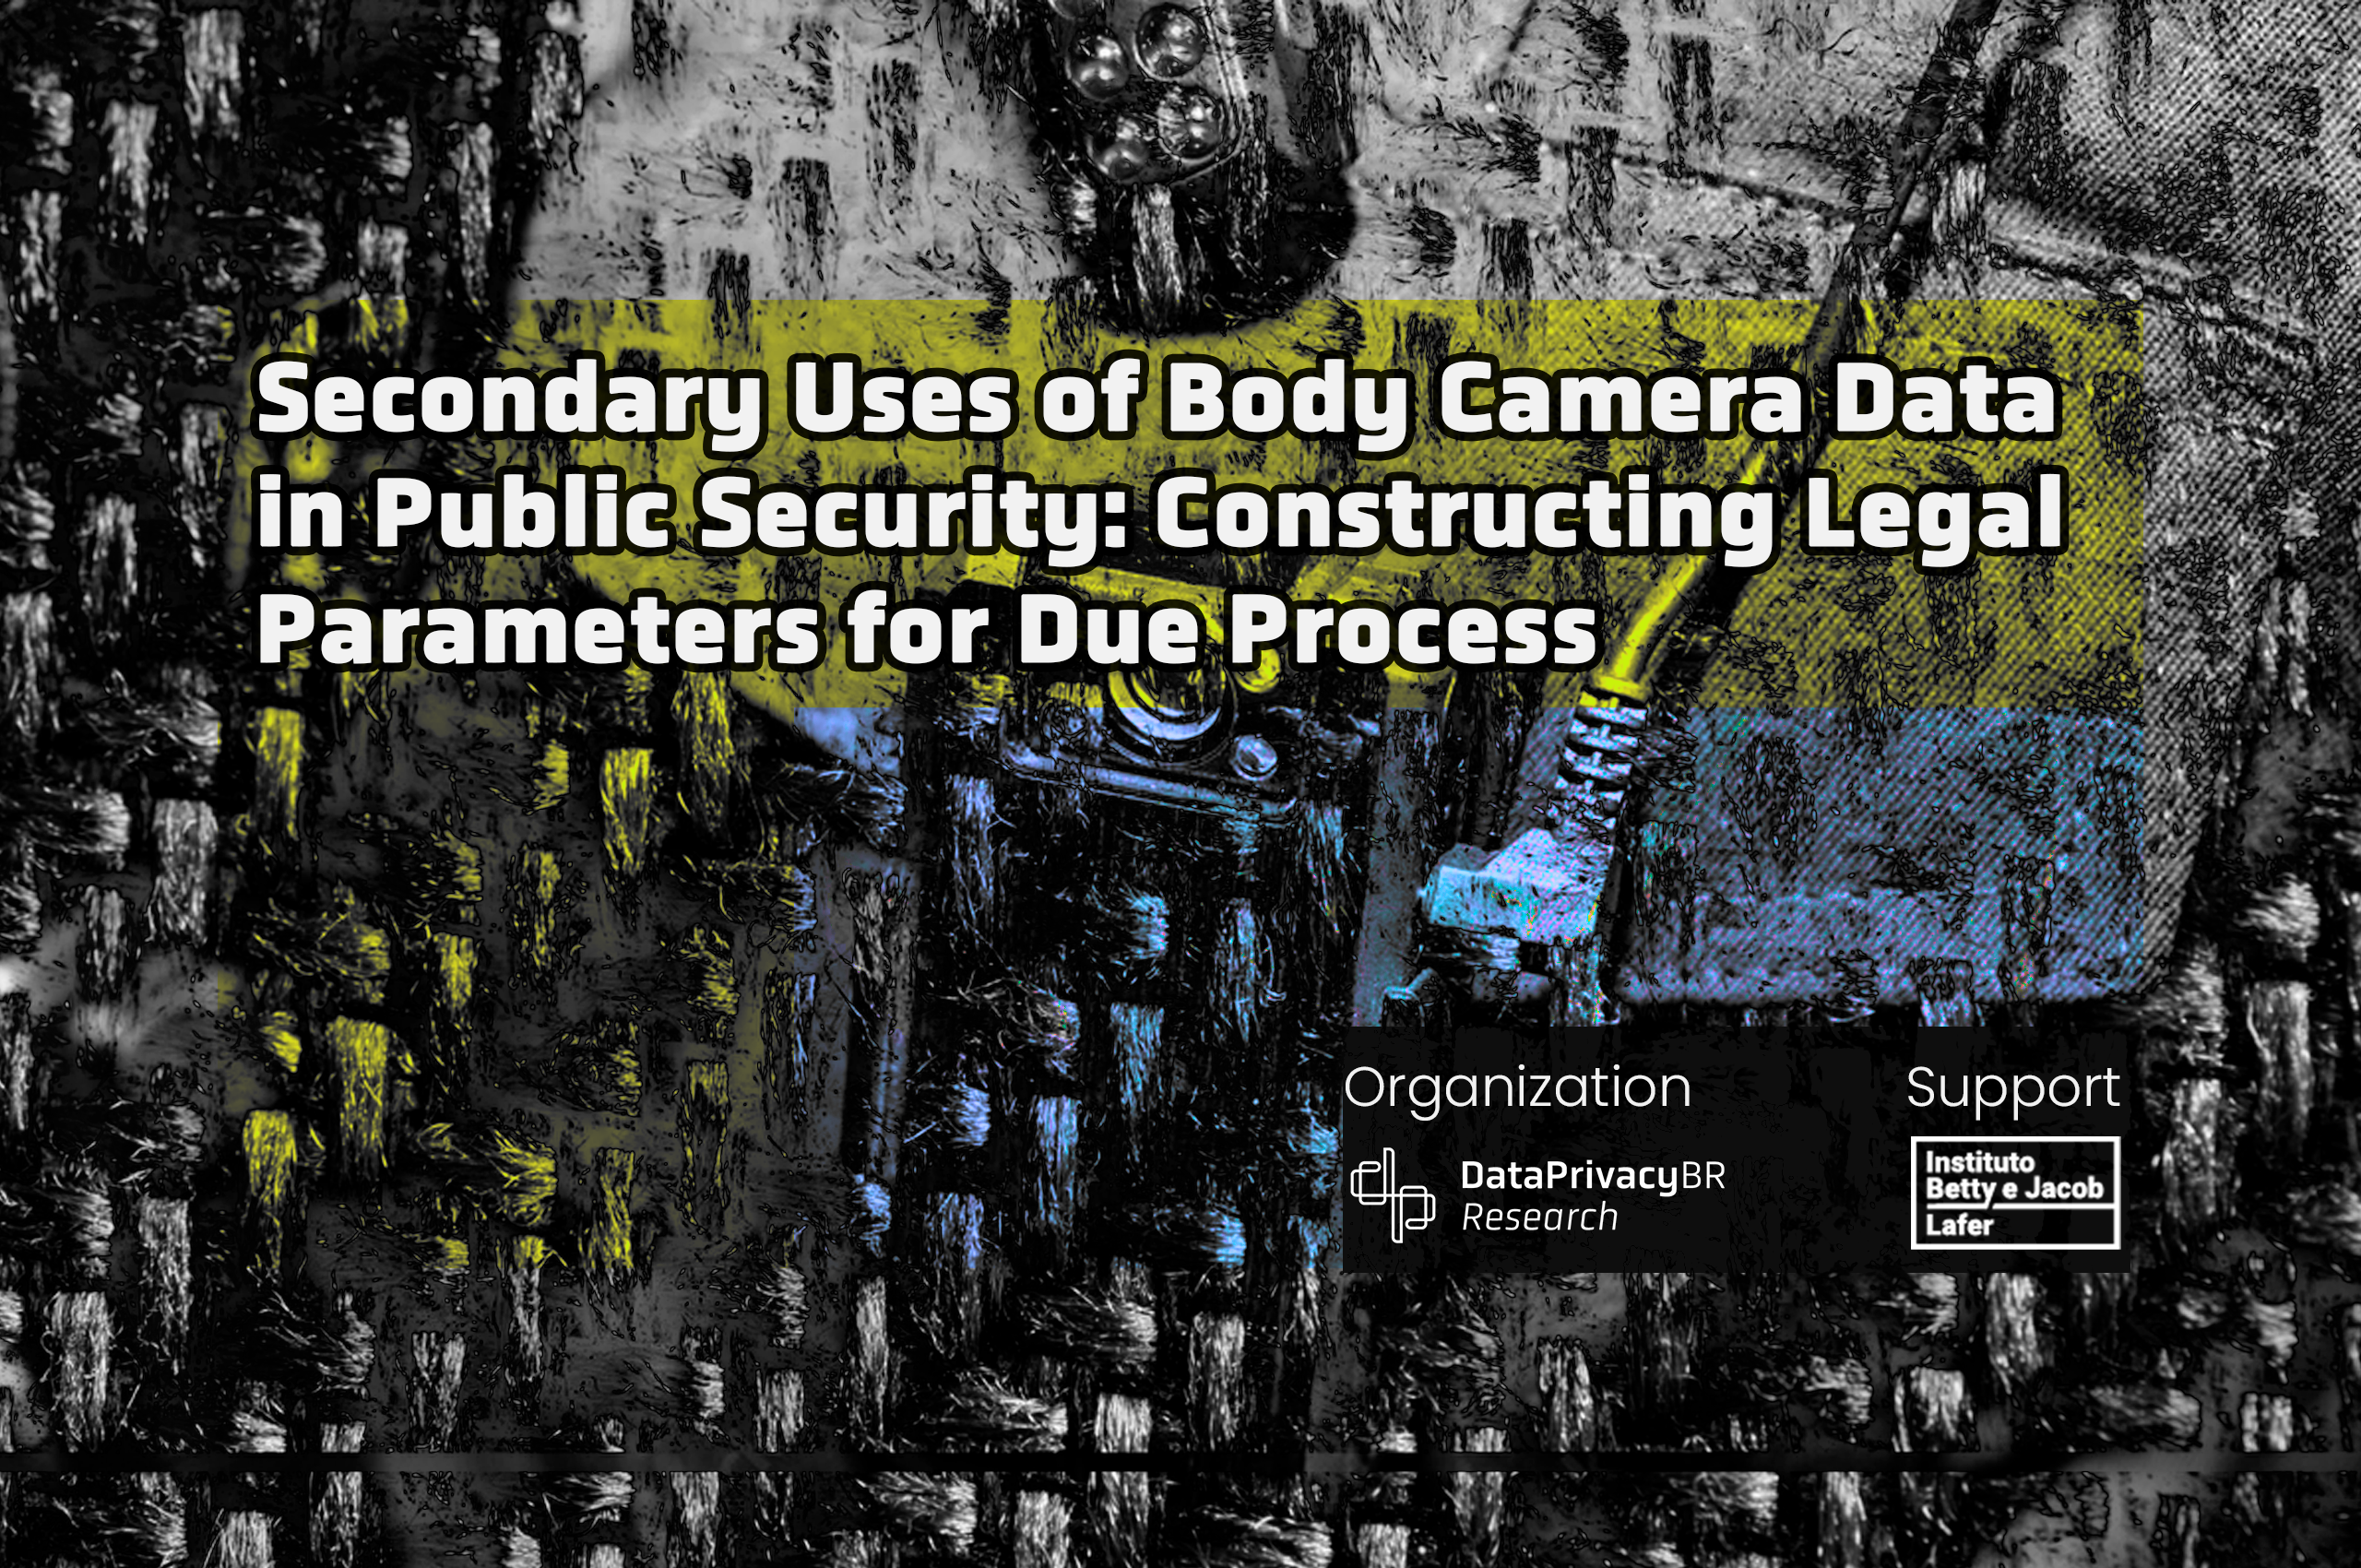 Secondary Uses of Body Camera Data in Public Security: Constructing Legal Parameters for Due Process